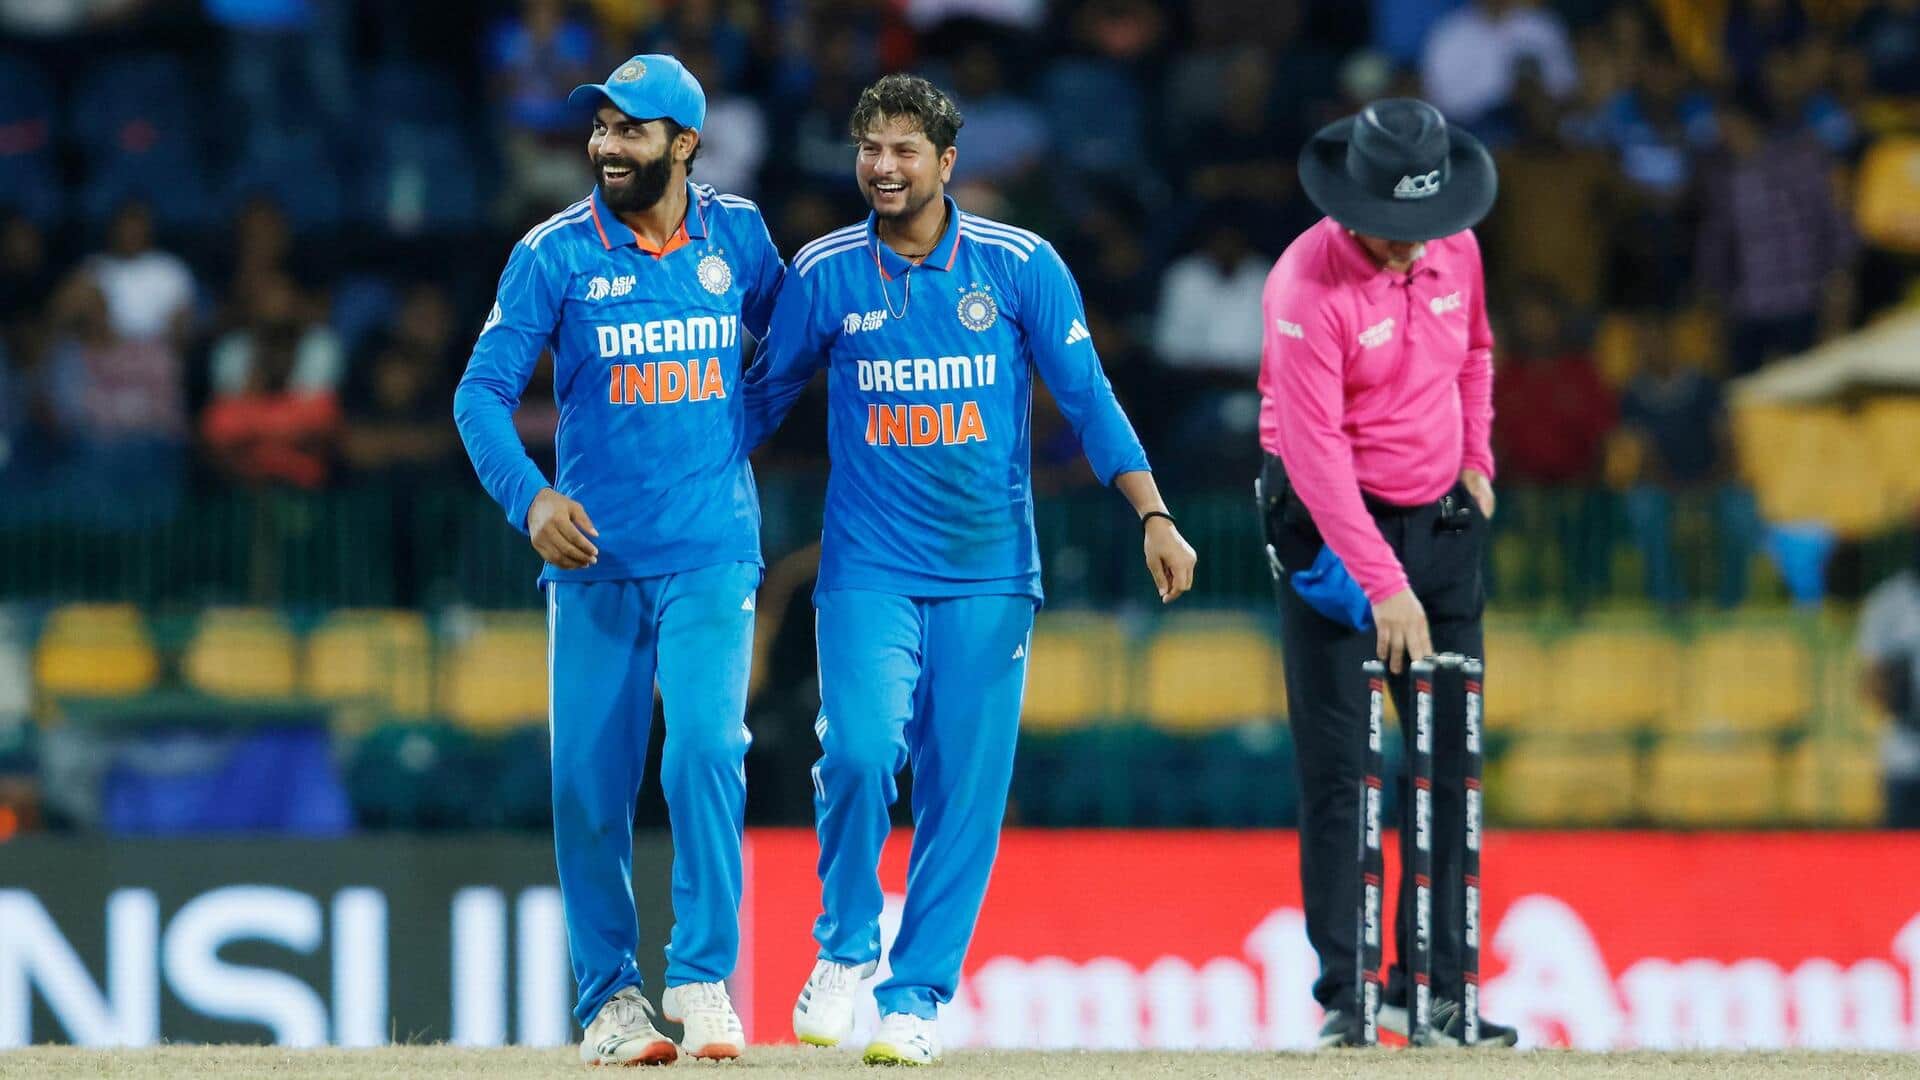 Kuldeep Yadav becomes fastest Indian spinner to 150 ODI wickets